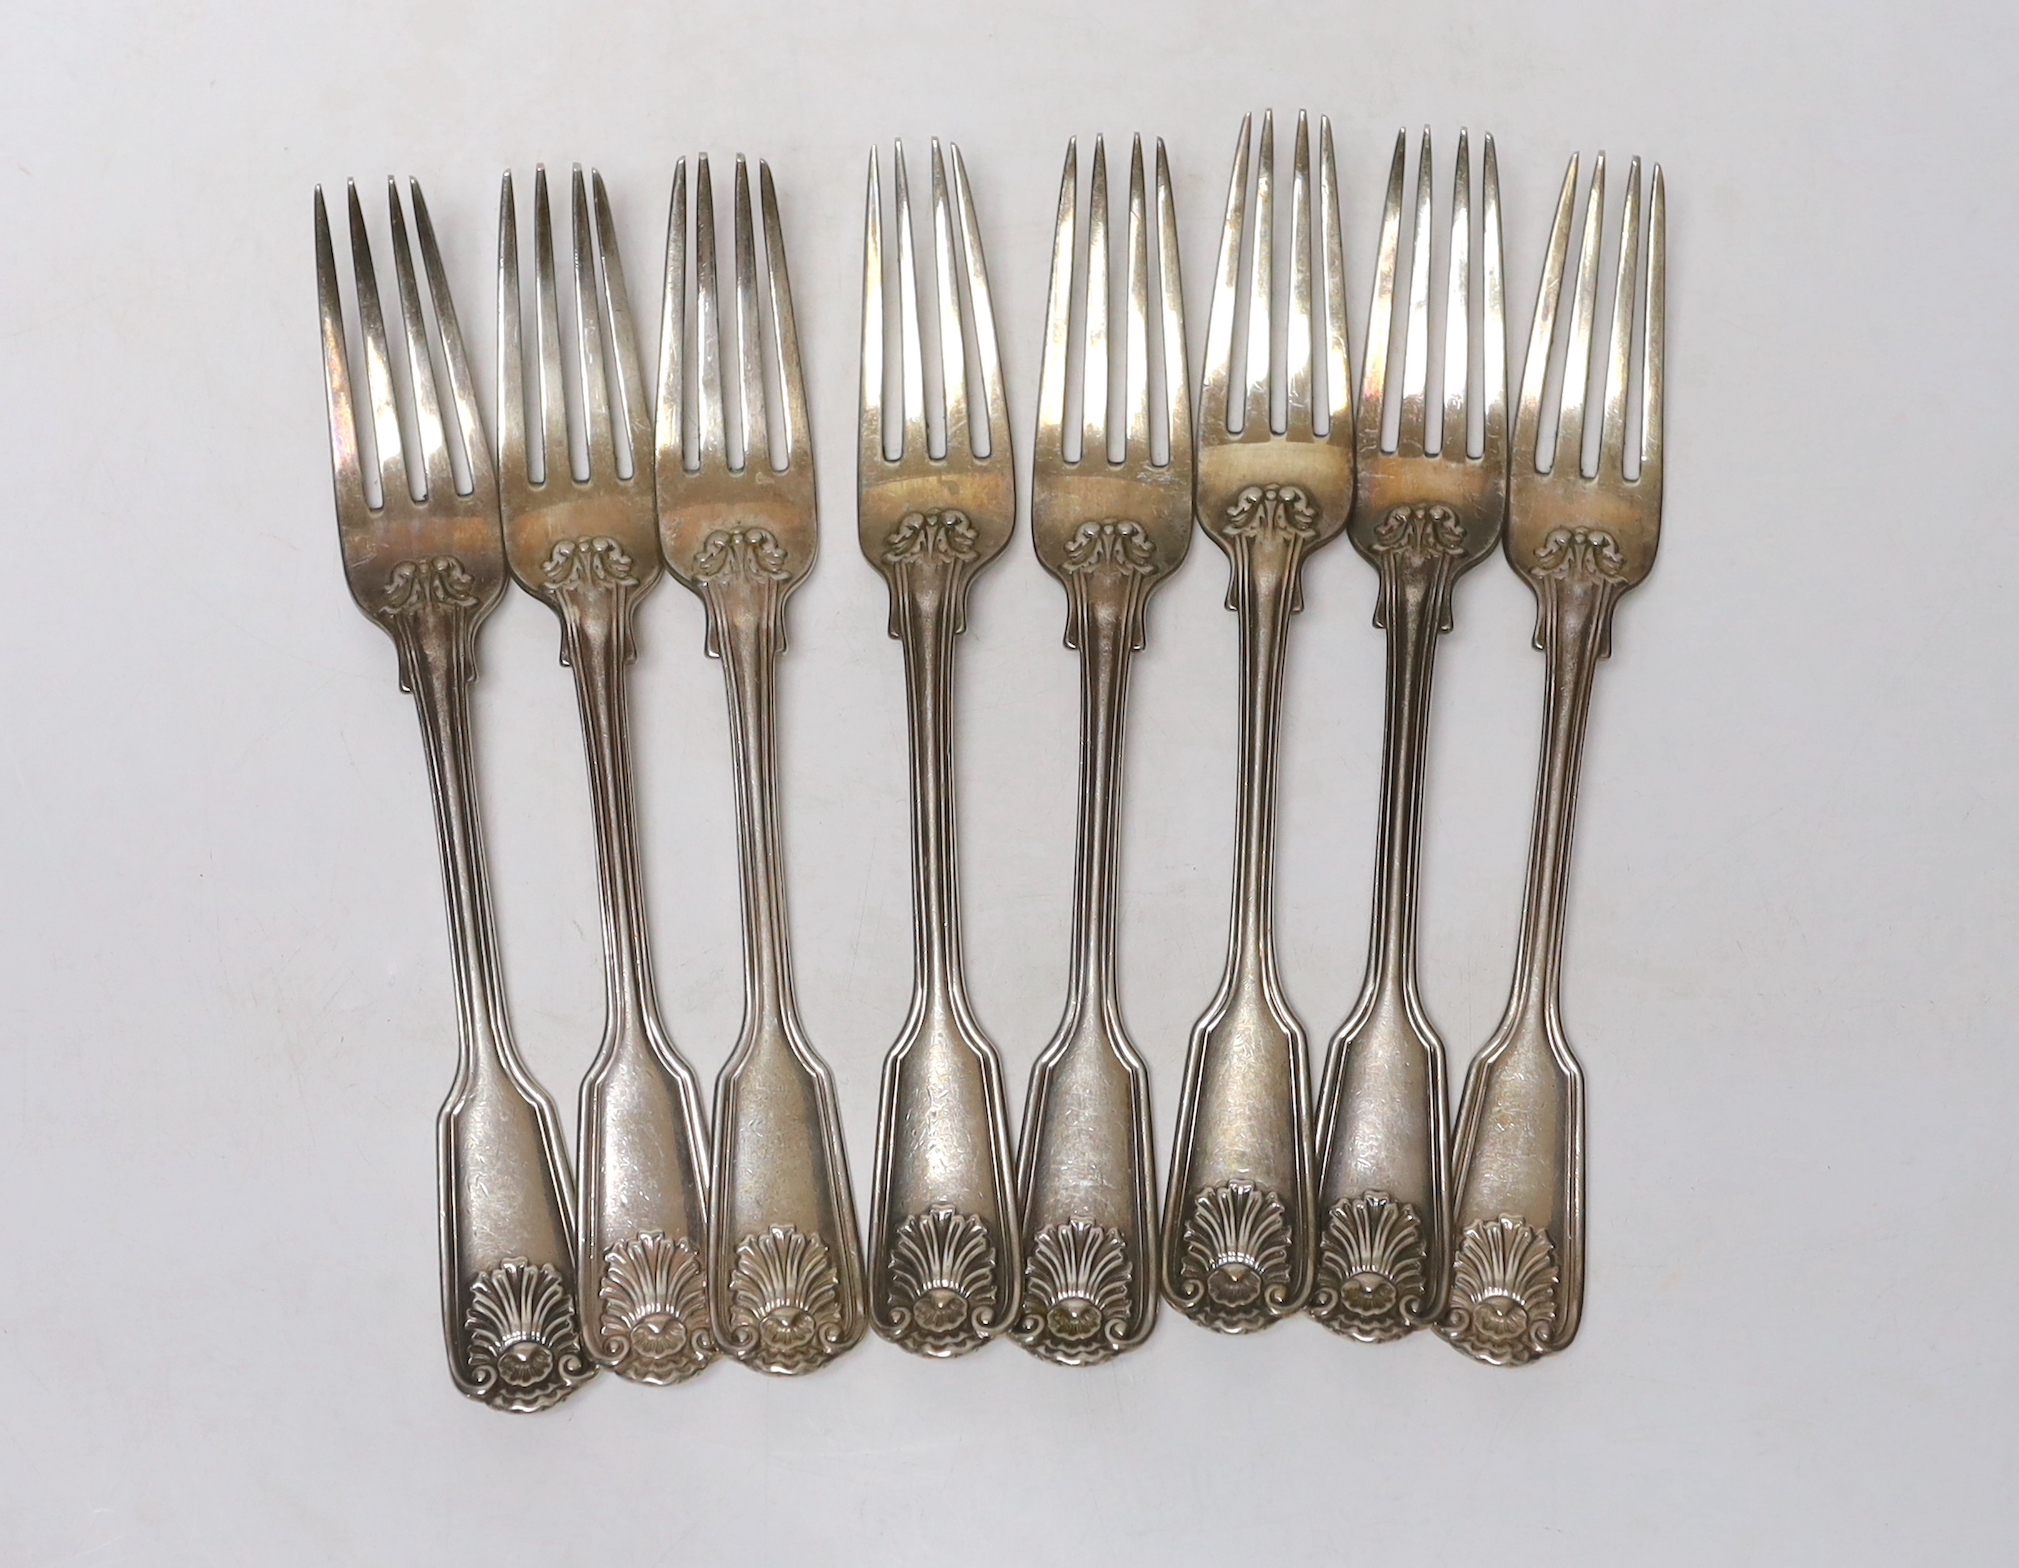 A set of eight Victorian silver fiddle, thread and shell pattern table forks, by George Adams, London, 1859, 20.3cm, 25.8oz.                                                                                                